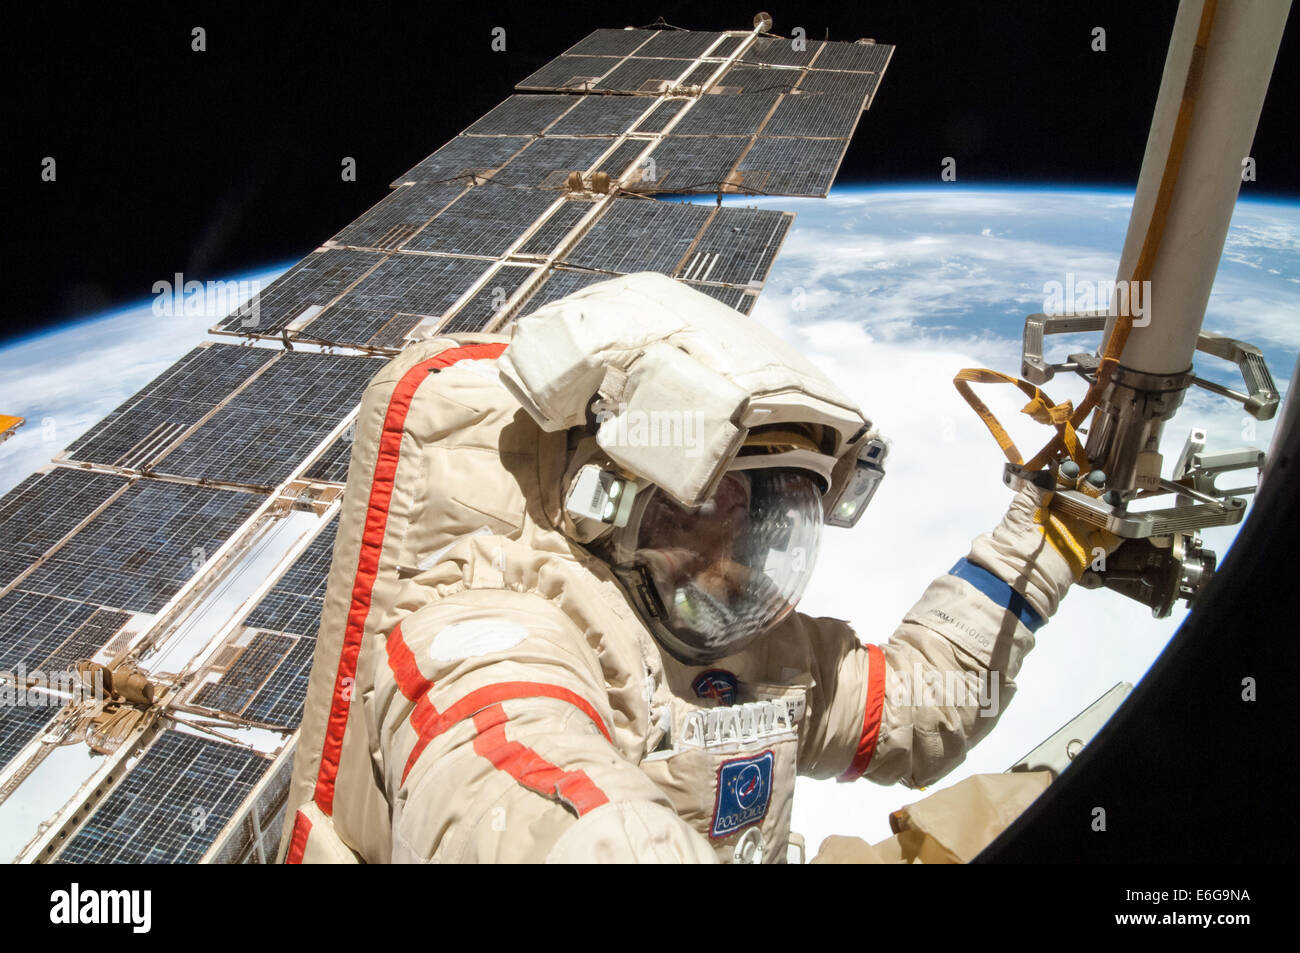 Russian cosmonauts Alexander Skvortsov with the International Space Station Expedition 40 crew works on installing experiment packages and inspecting components on the exterior of the orbital laboratory during a five-hour, 11-minute spacewalk August 18, 2014 in Earth Orbit. Stock Photo